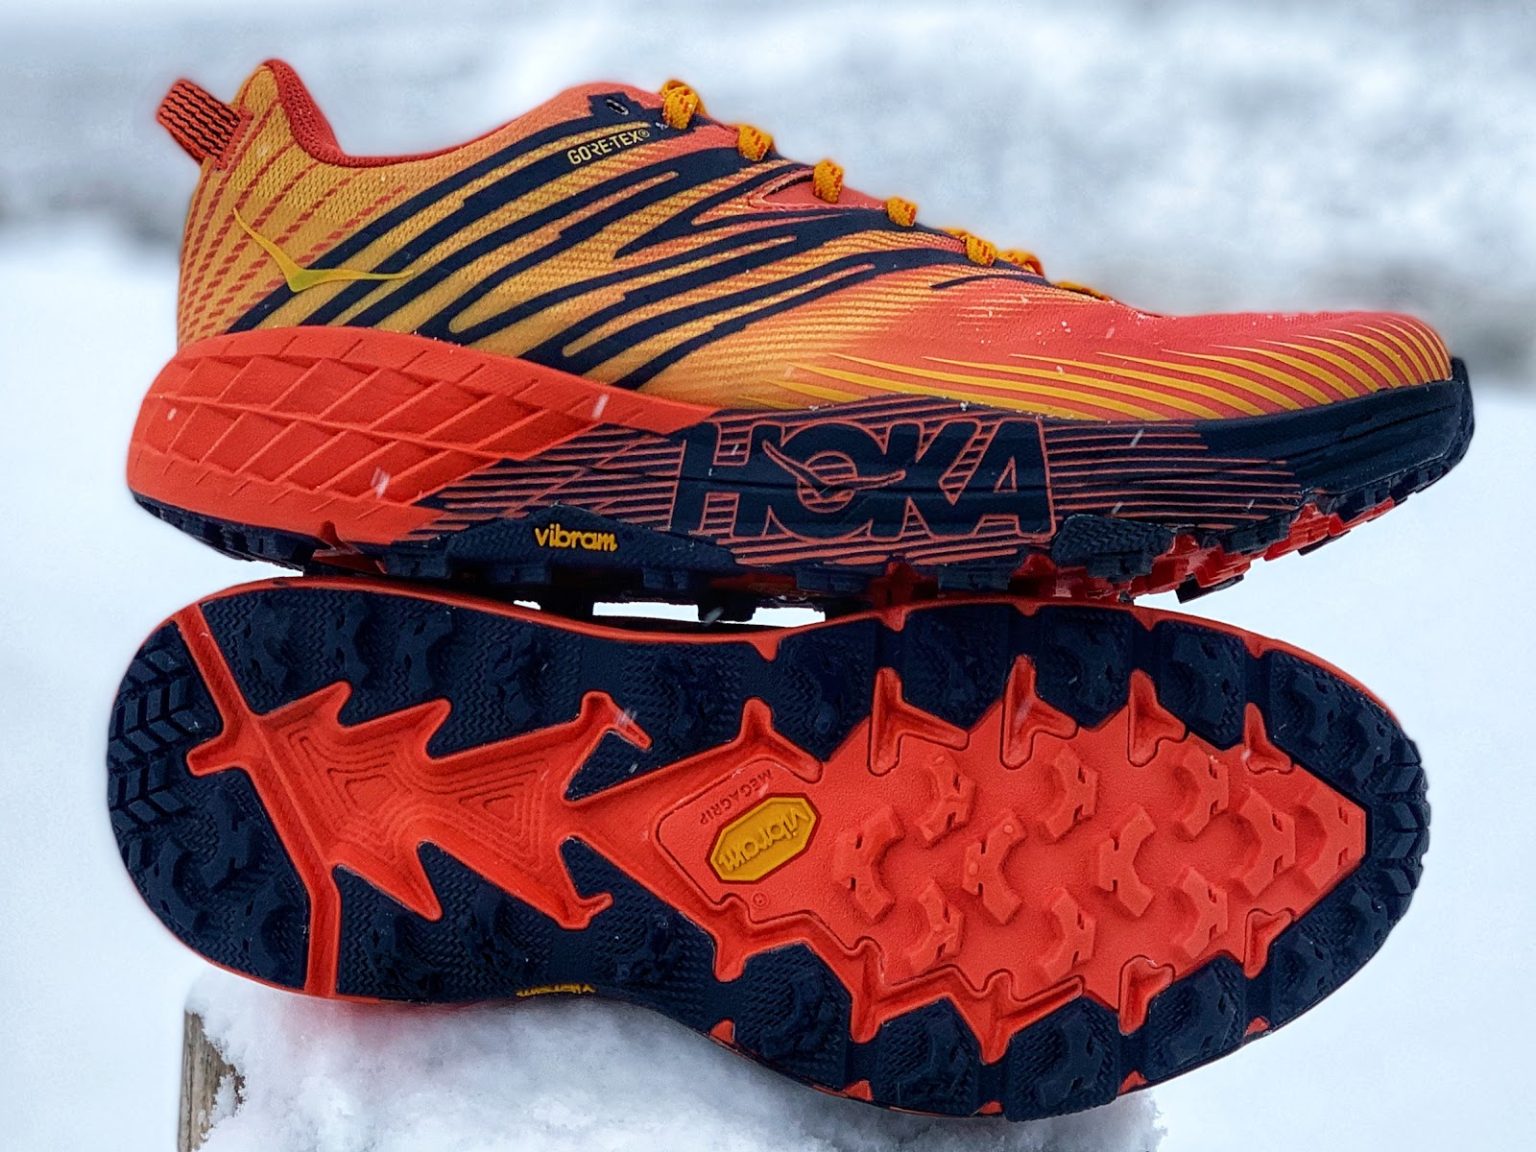 10 Best Hoka Shoes For Walking in 2023